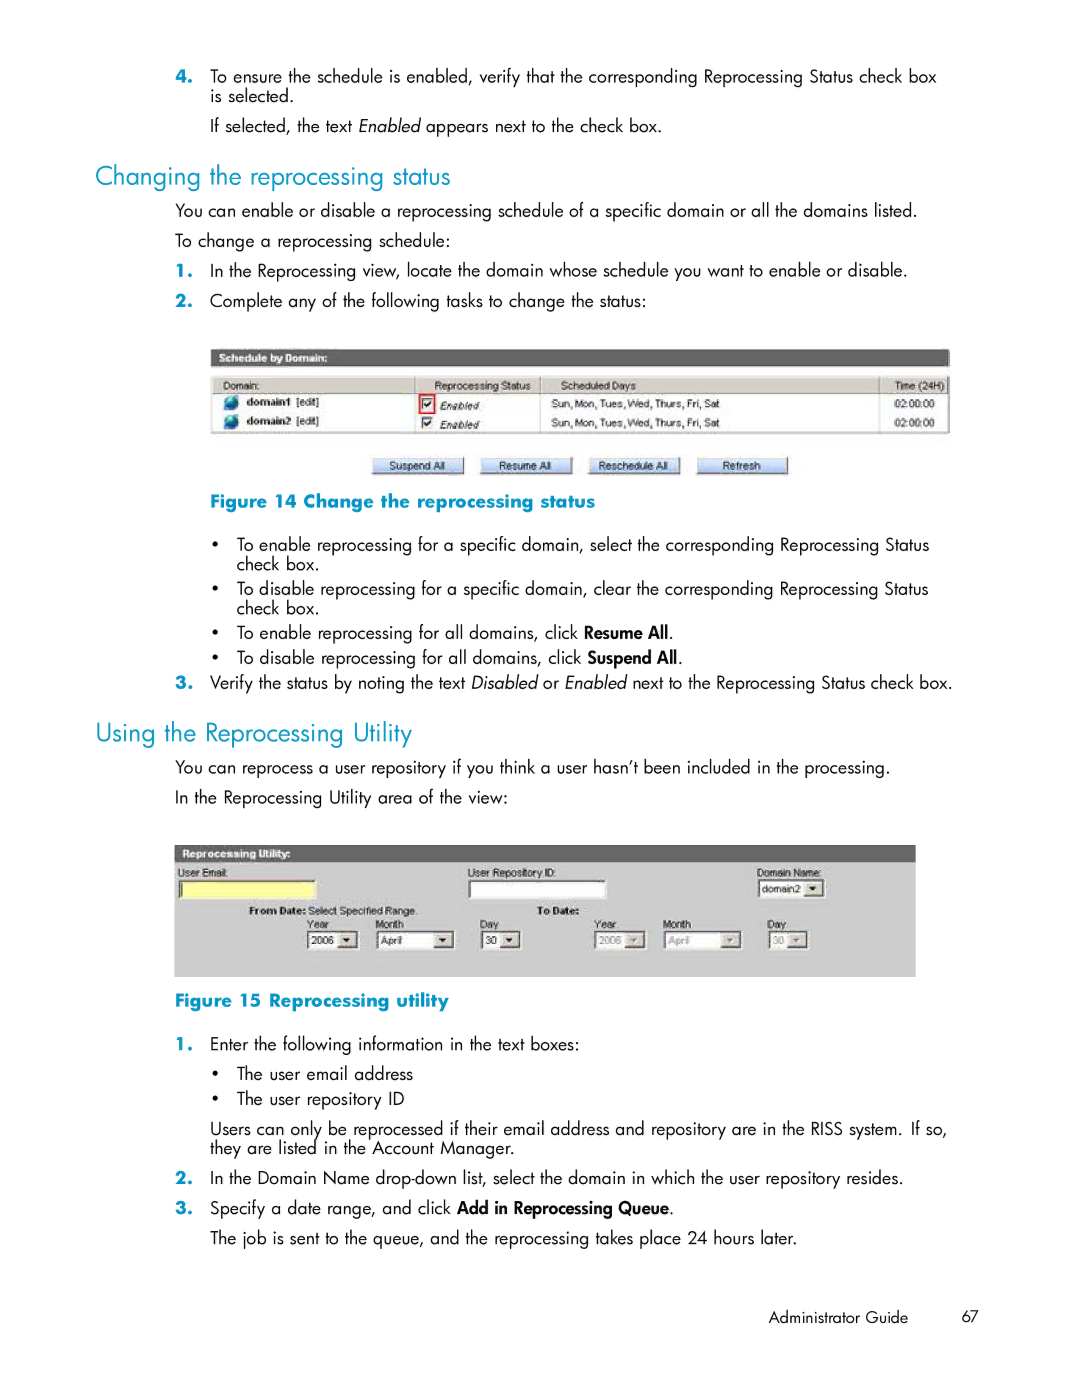 HP RISS Components manual Changing the reprocessing status, Using the Reprocessing Utility 